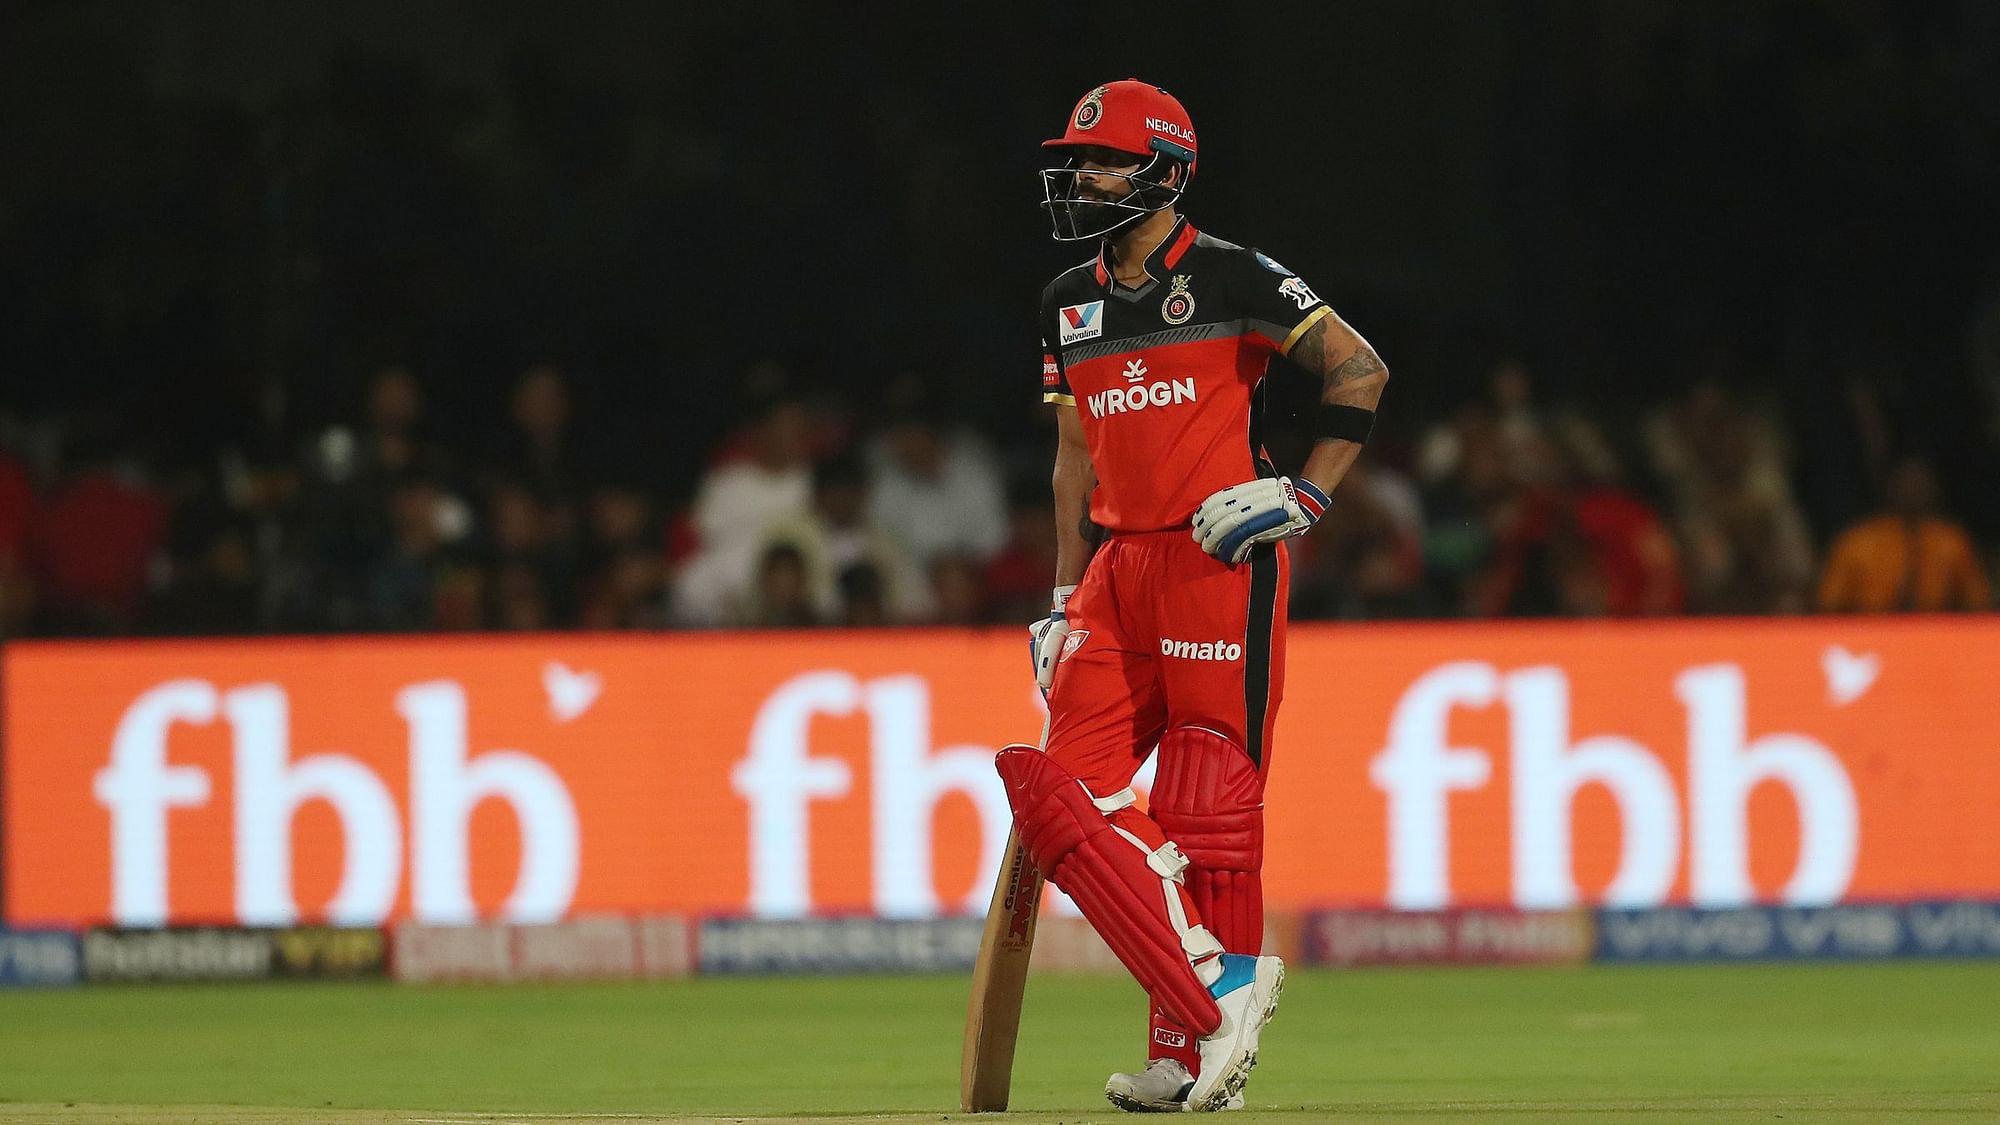 Royal Challengers Bangalore skipper Virat Kohli came down heavily on his bowlers after the loss.